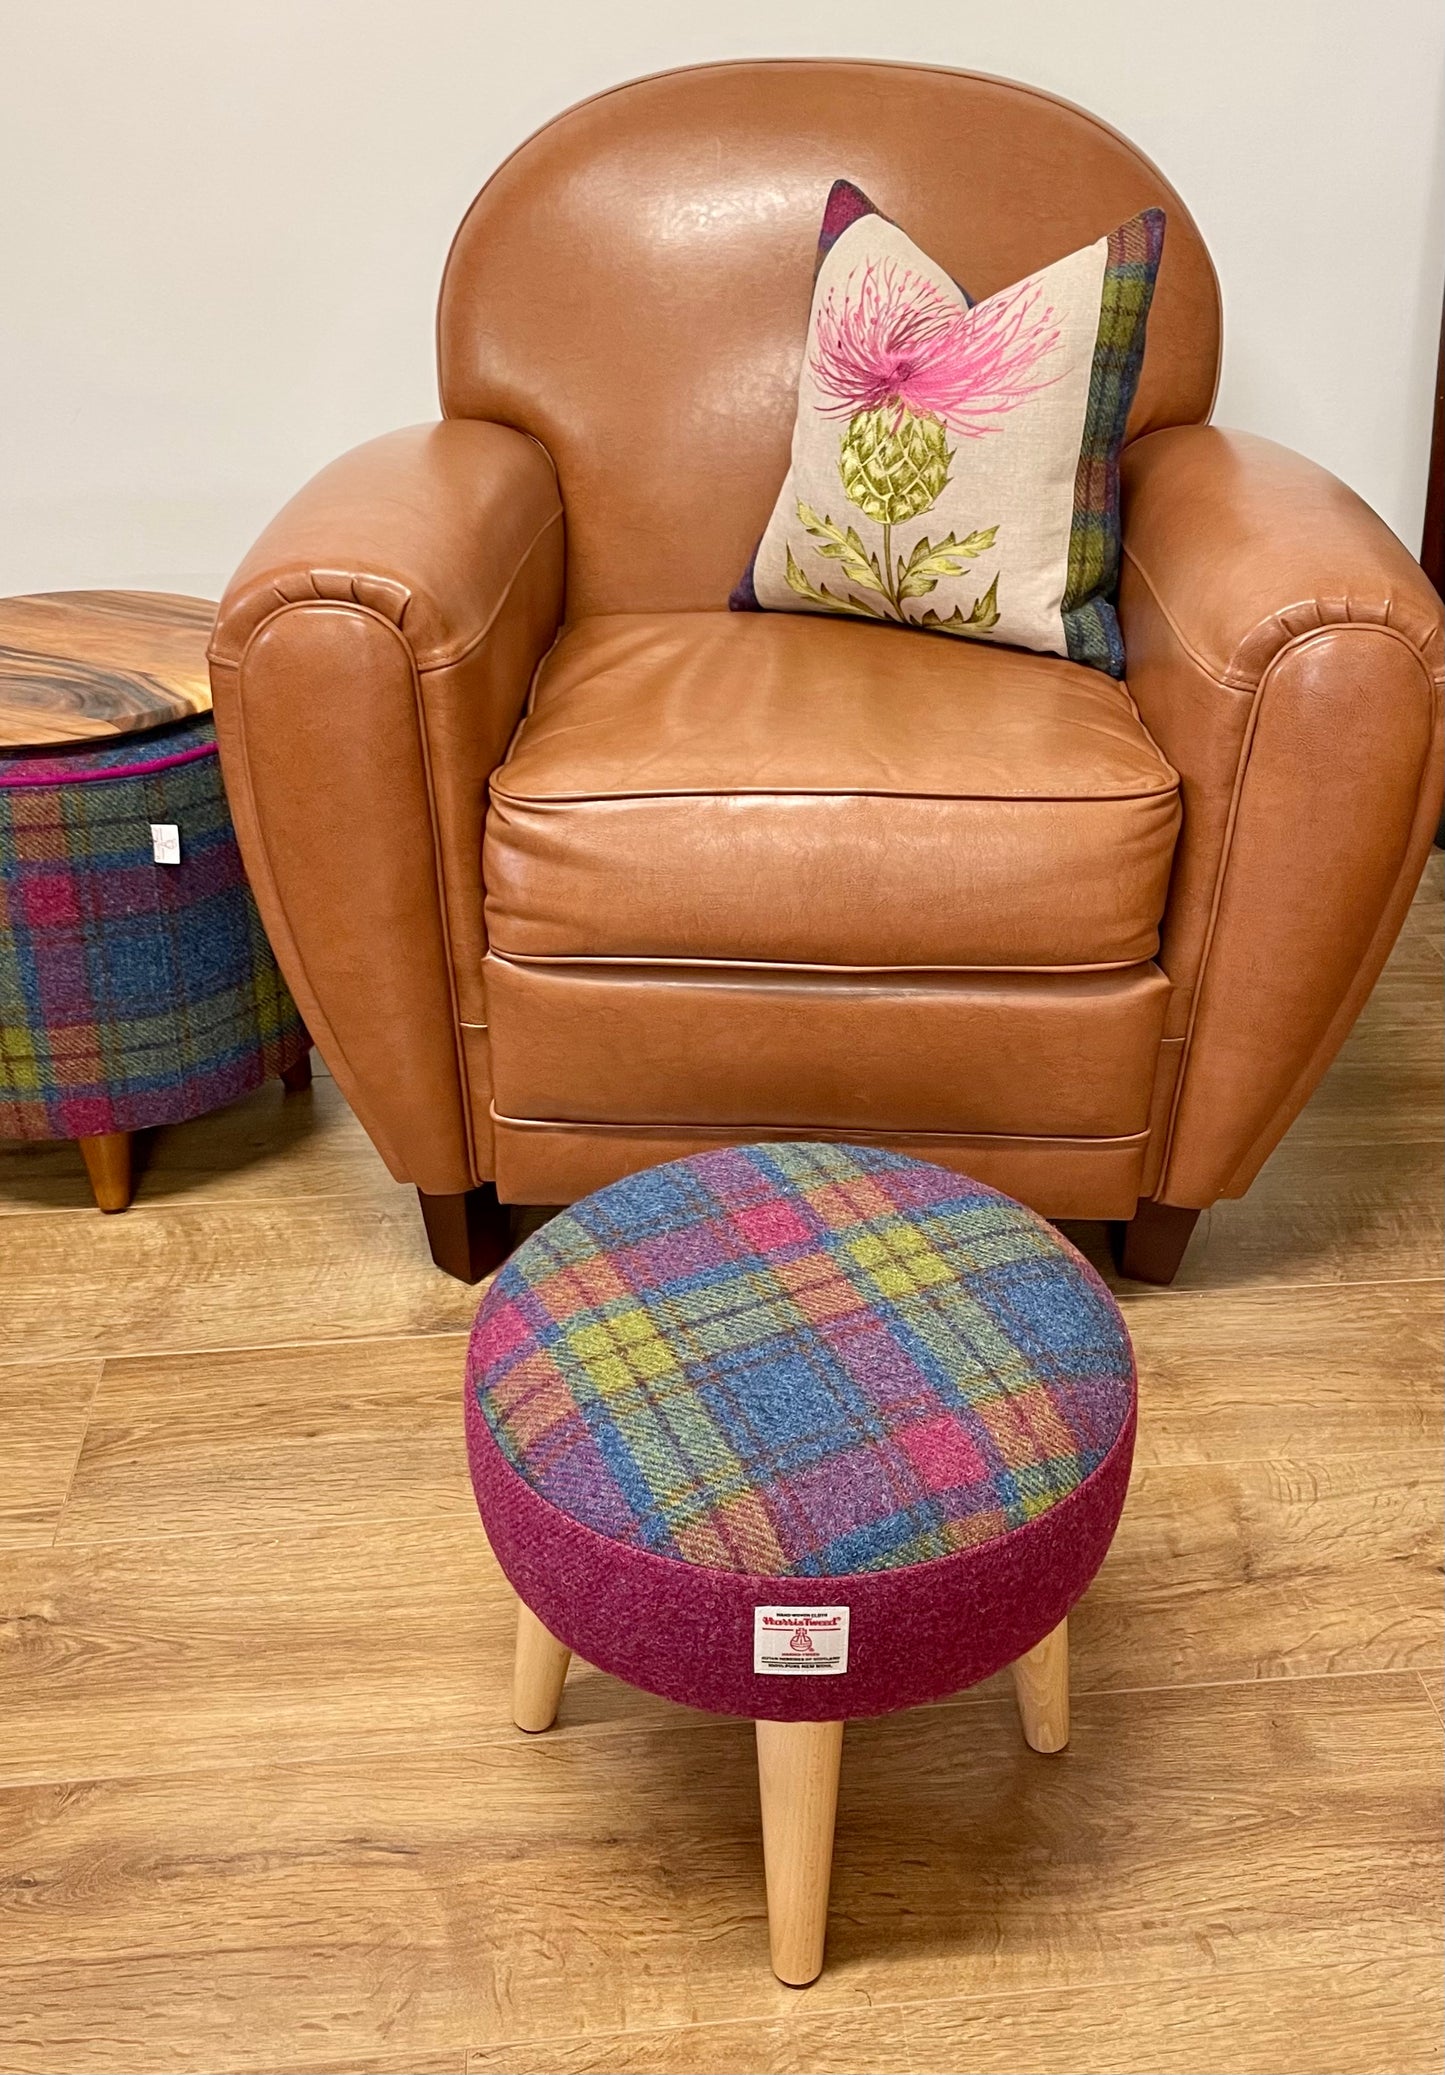 Colourful Tartan and Raspberry Harris Tweed Footstool with Varnished Wooden Legs